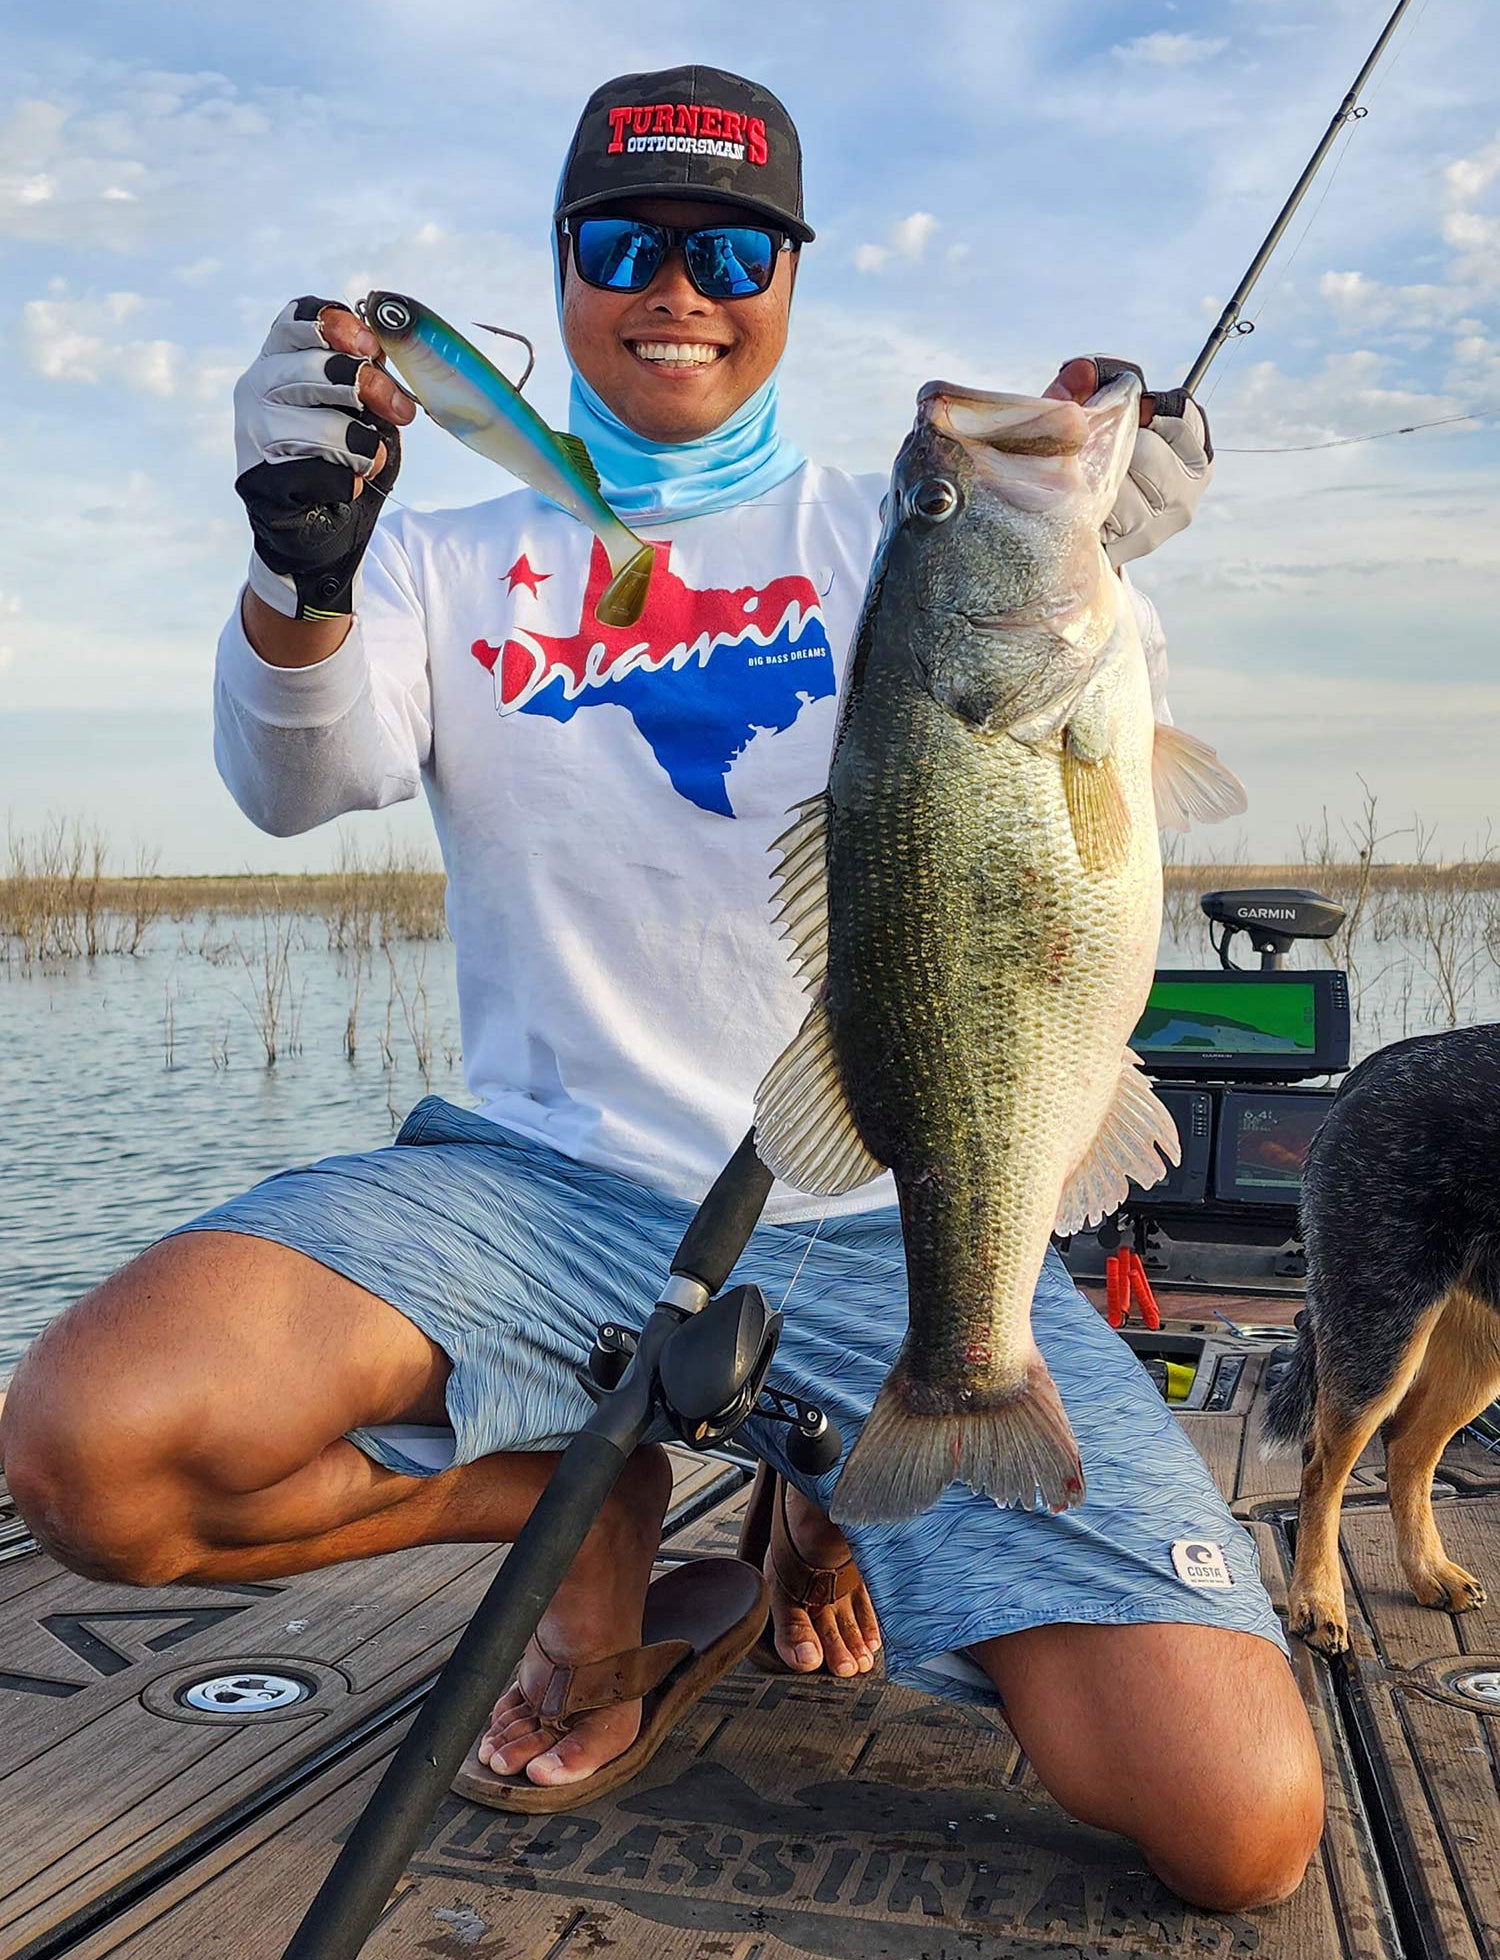 smiling angler holds up fishing lure and largemouth bass